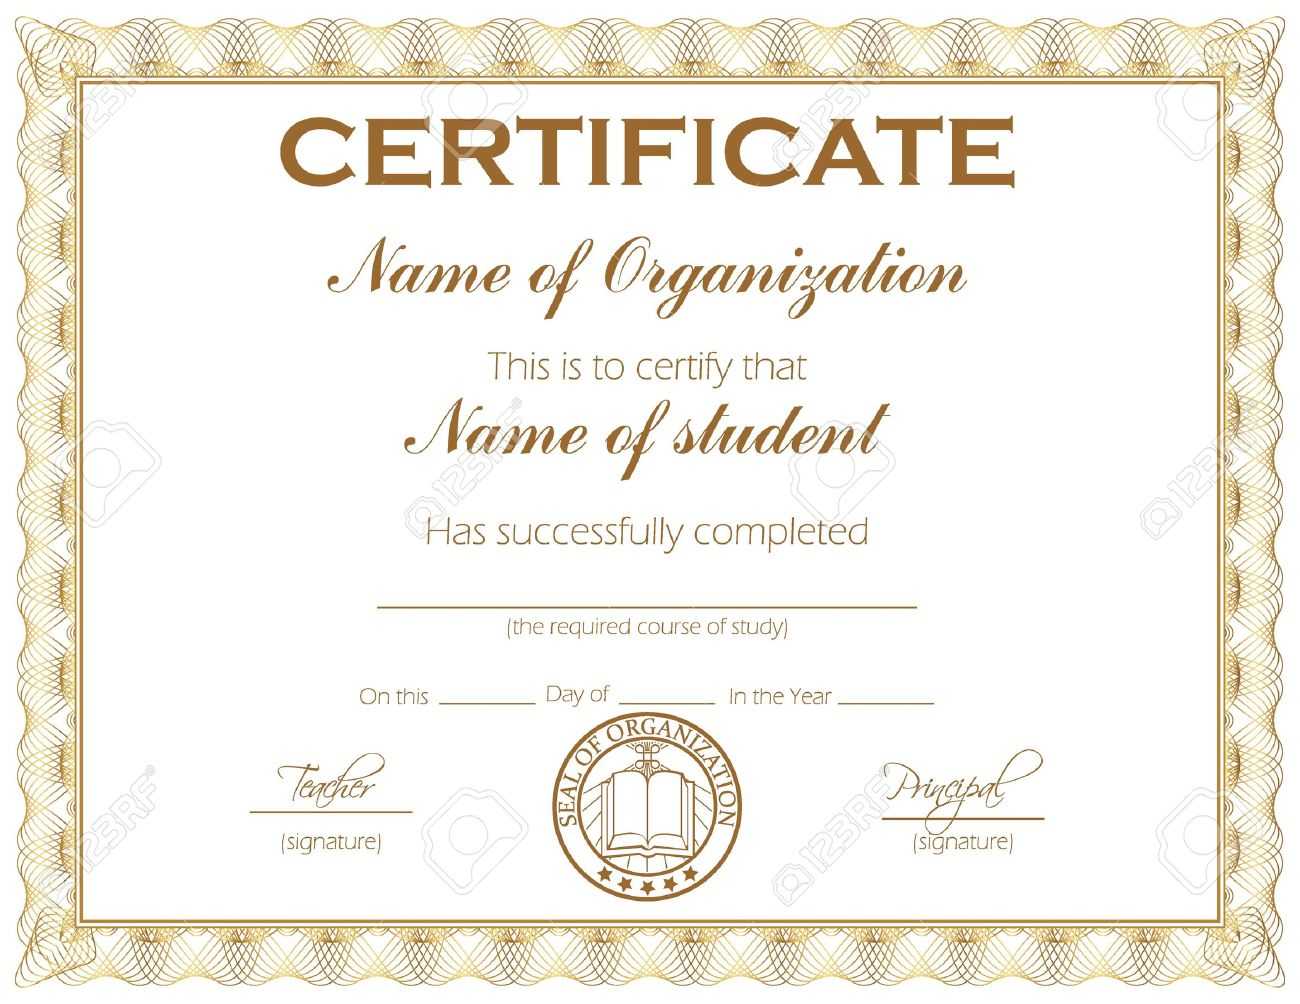 General Purpose Certificate Or Award With Sample Text That Can.. With Template For Certificate Of Award